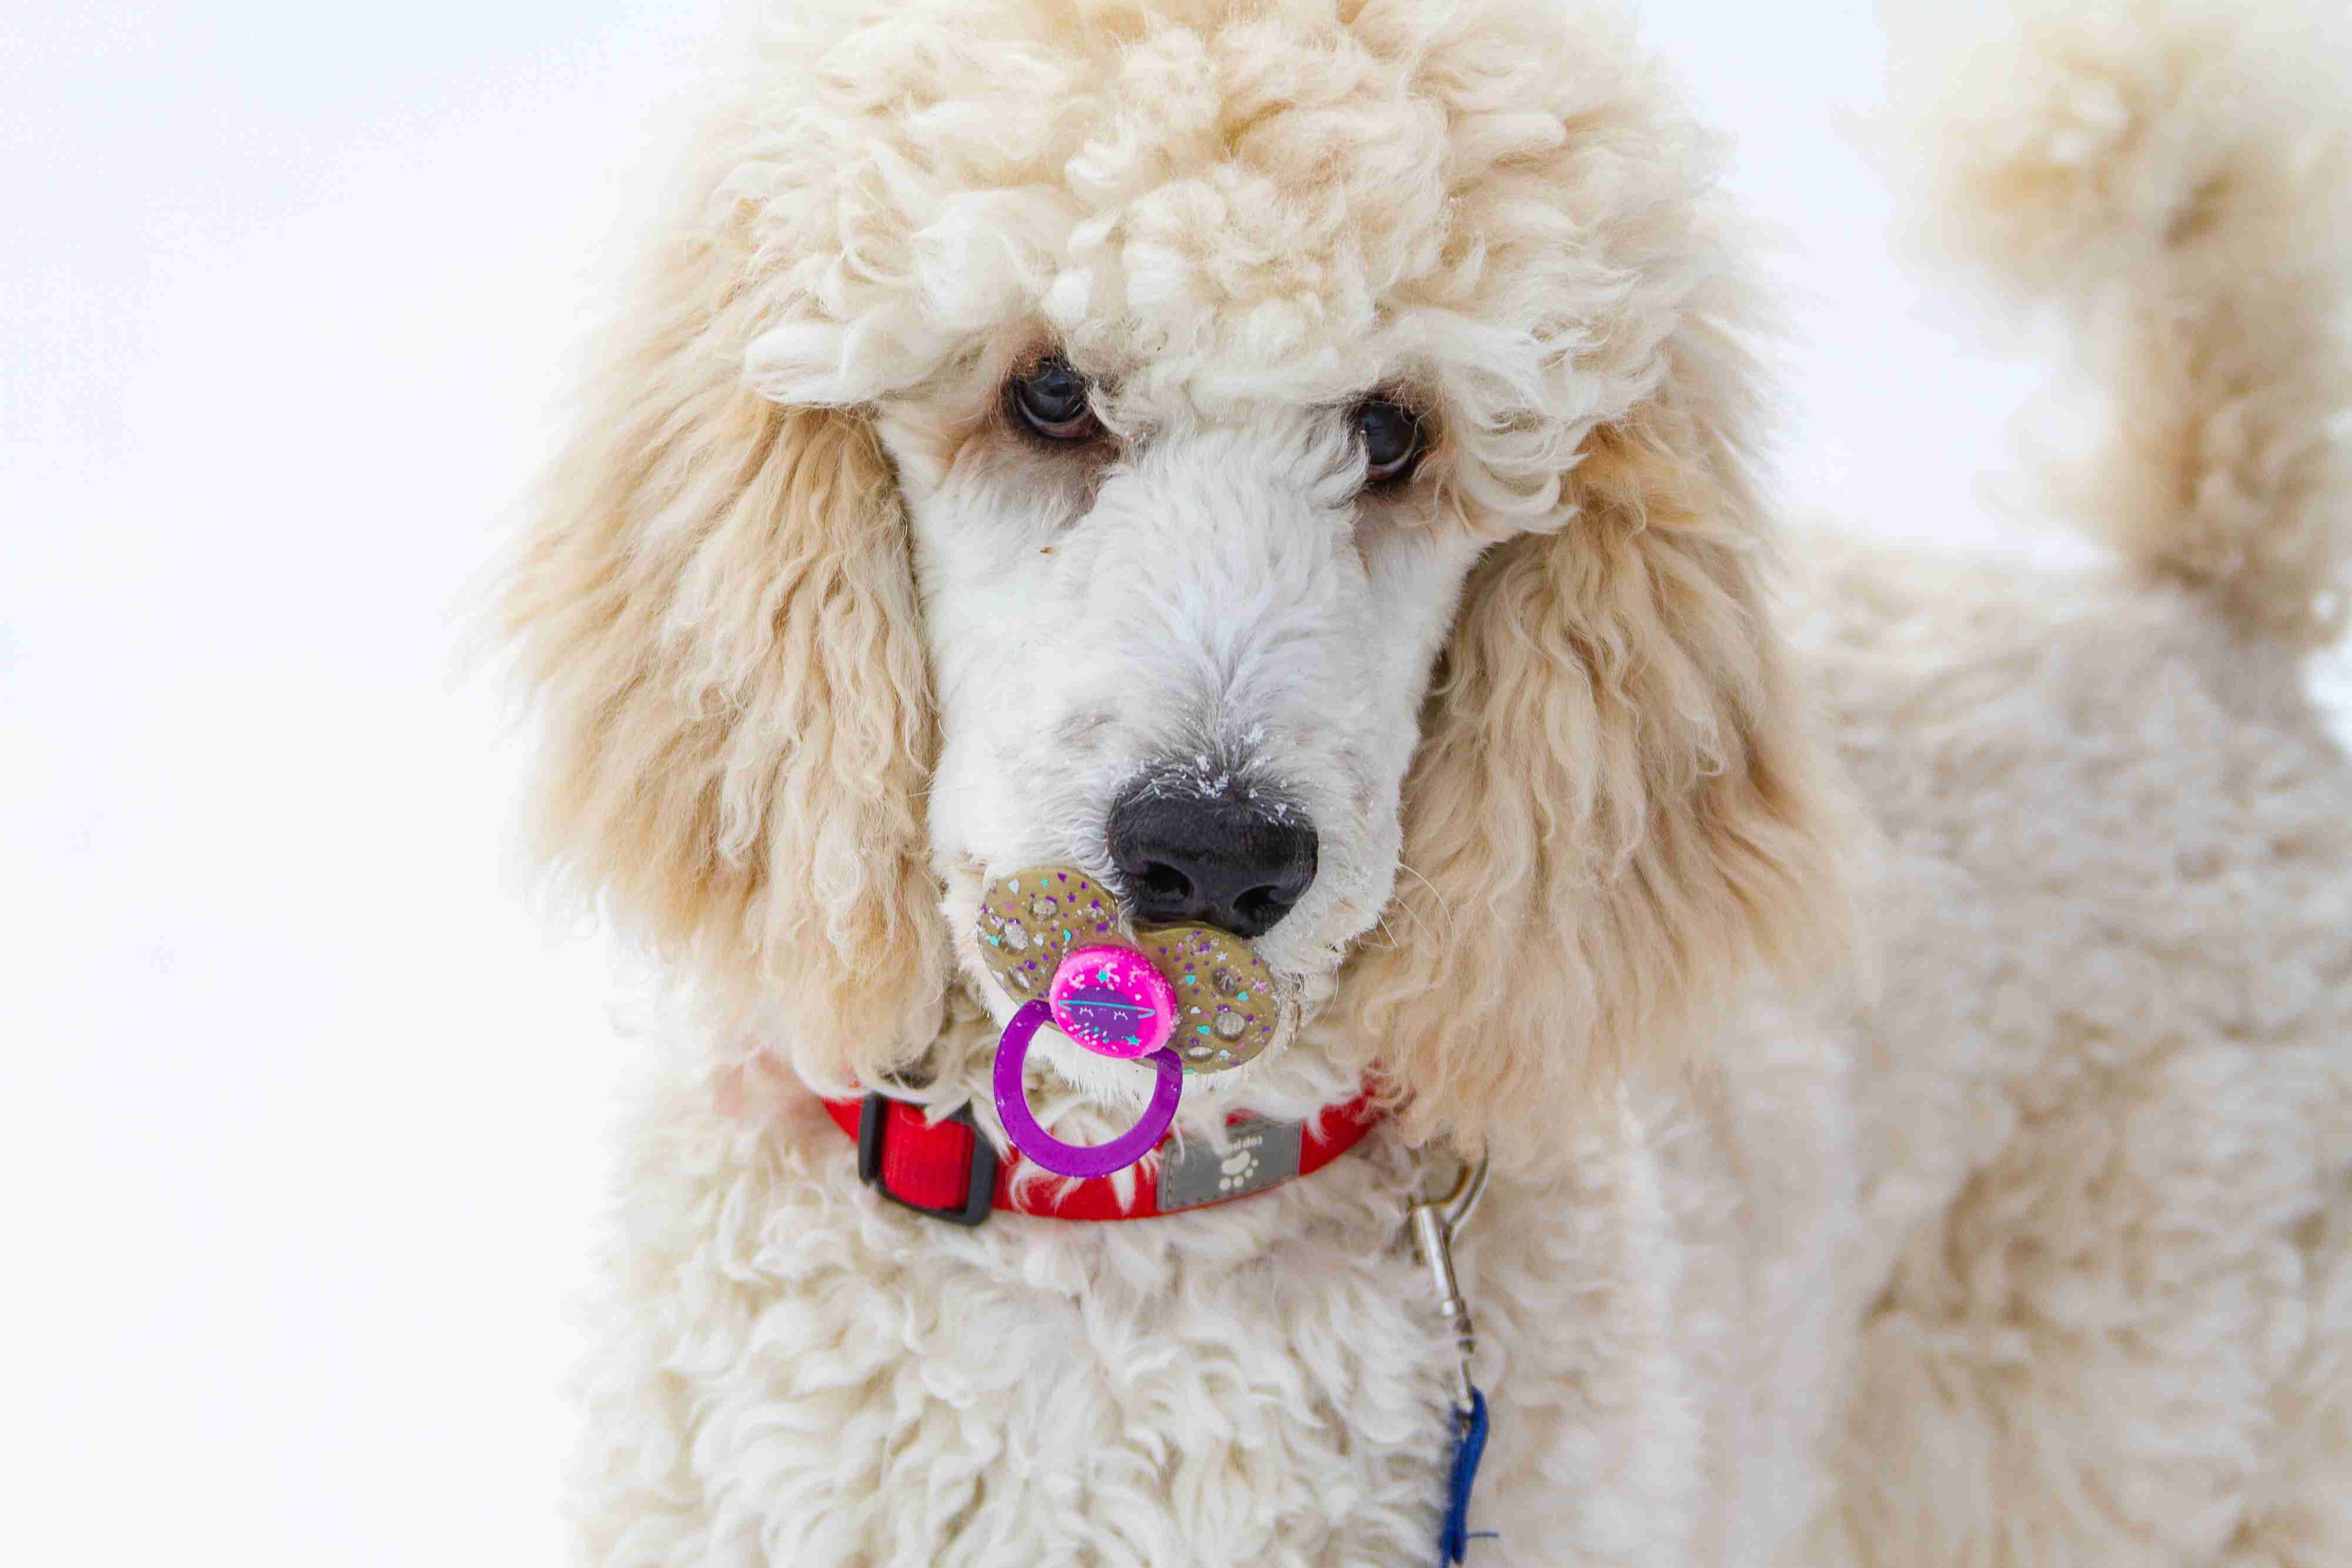 How did you handle any instances of food aggression or guarding from your Poodle puppy?